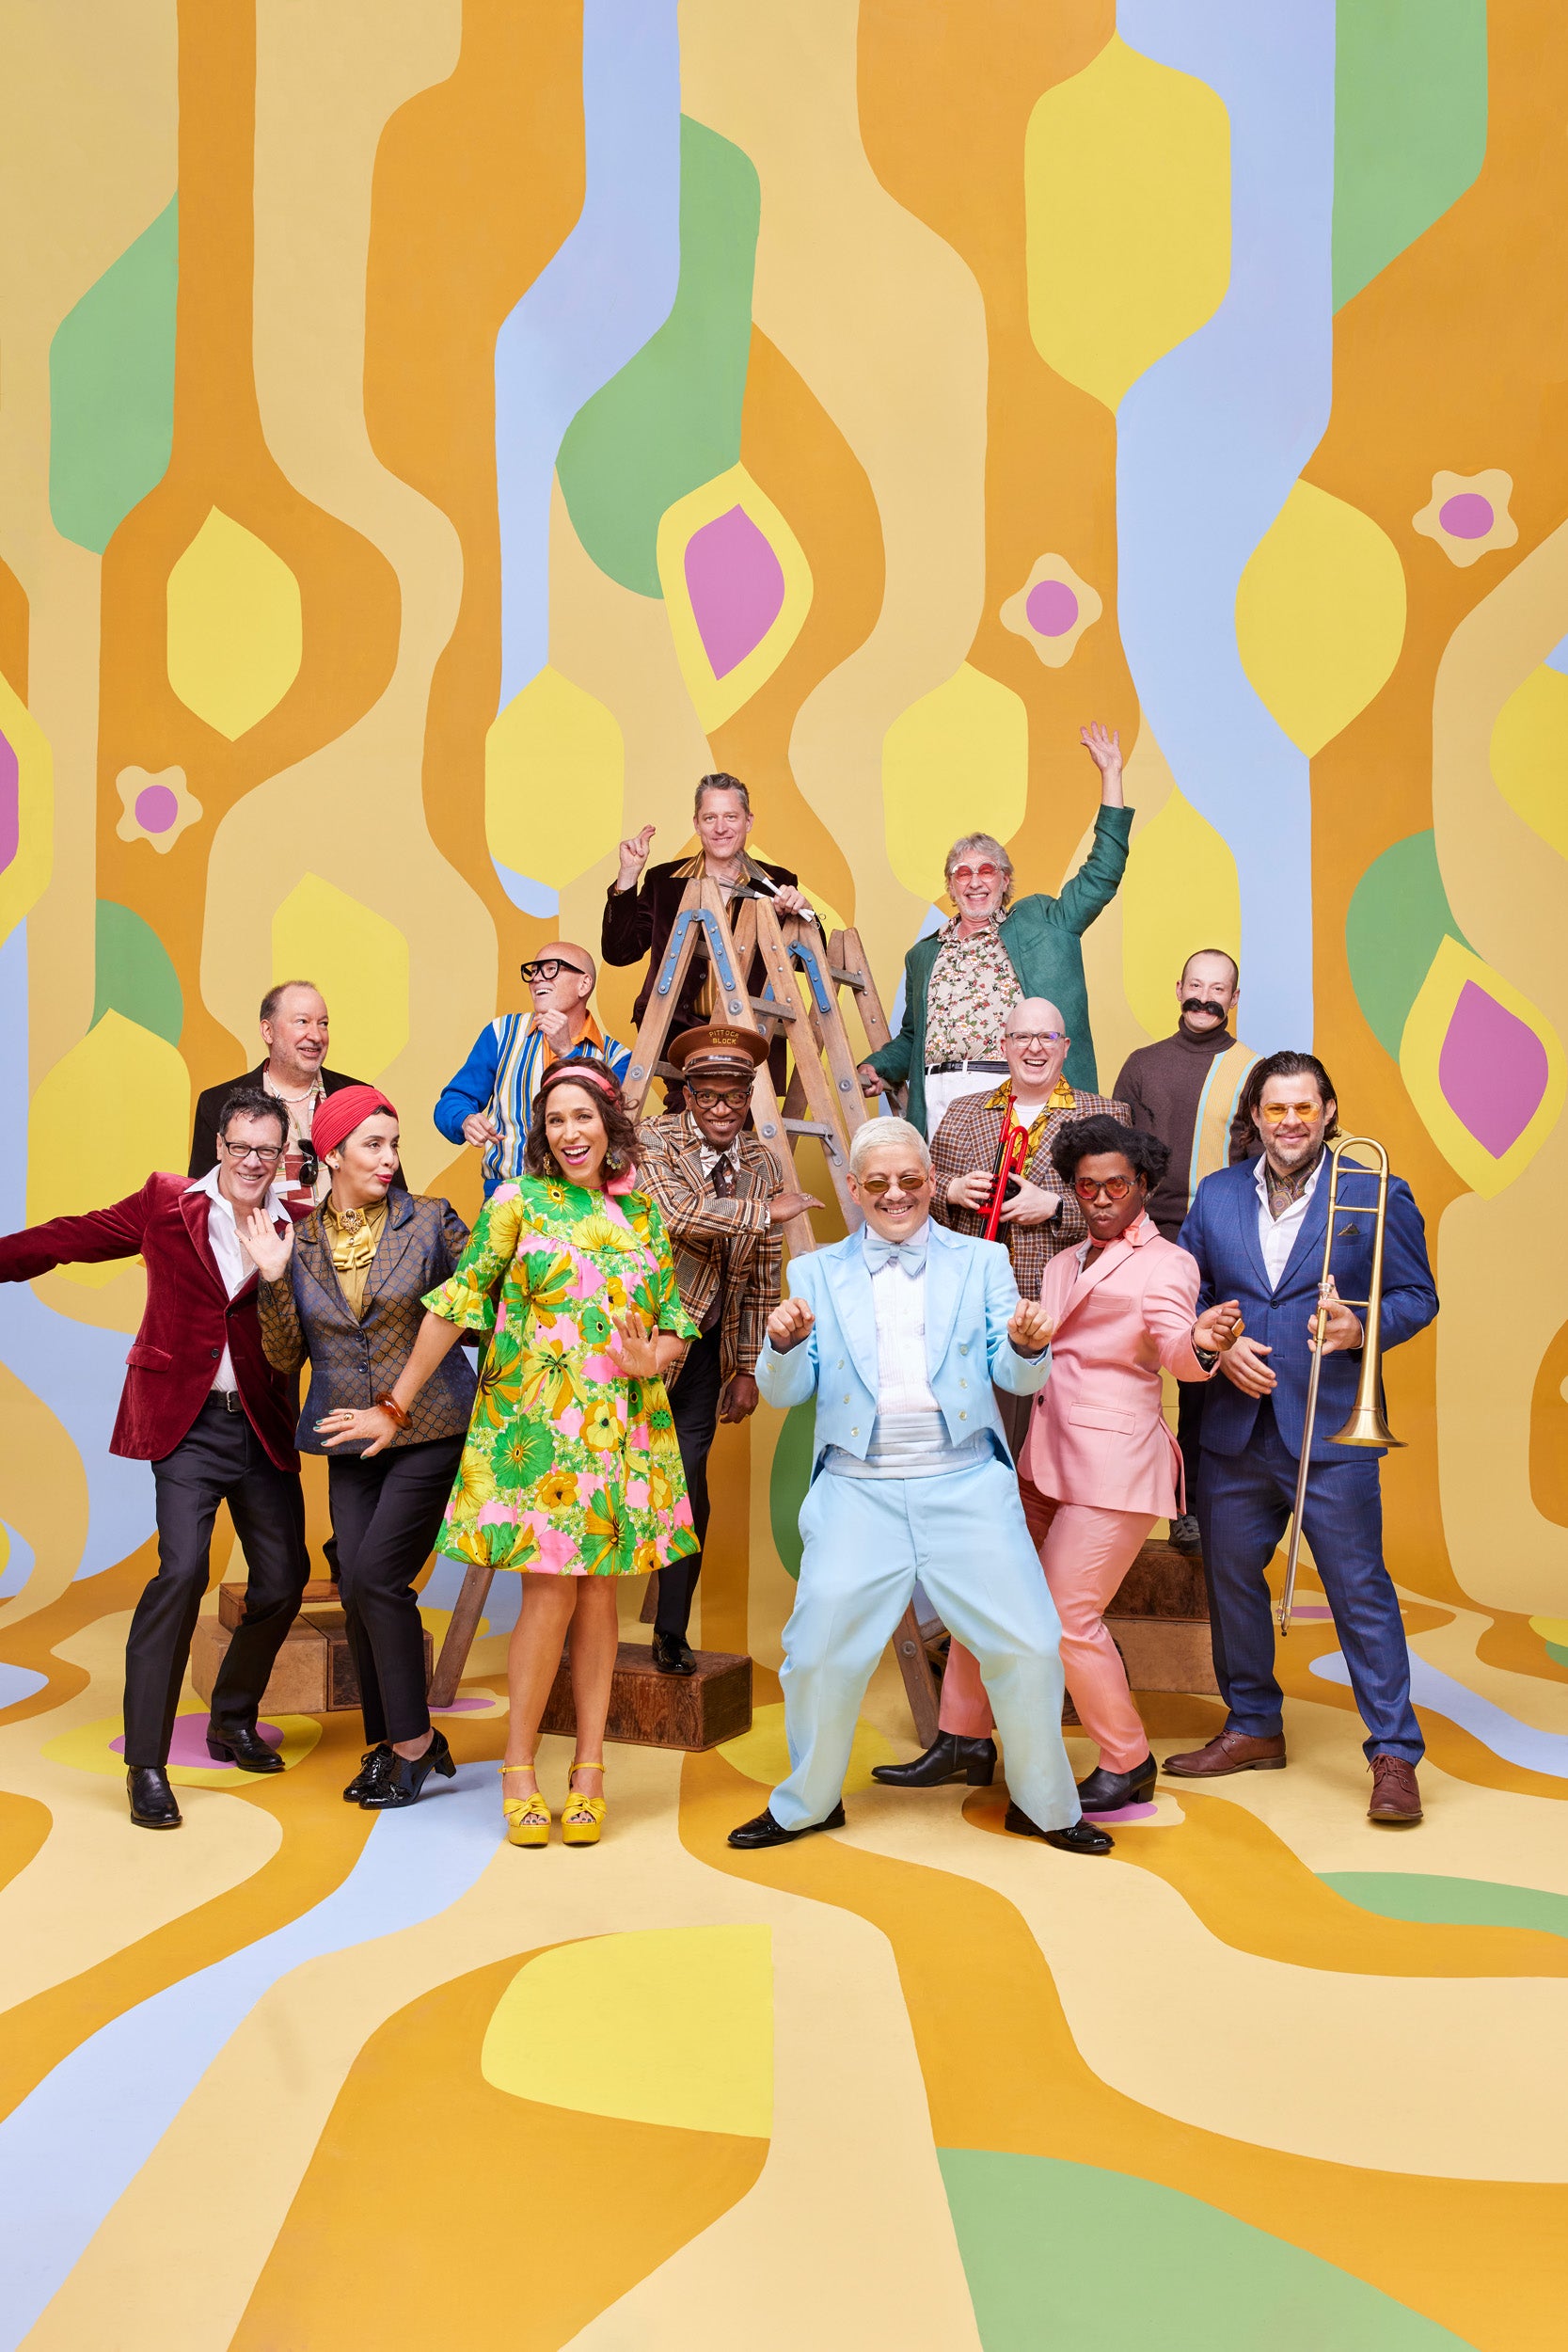 Pink Martini in London promo photo for Past Bookers presale offer code